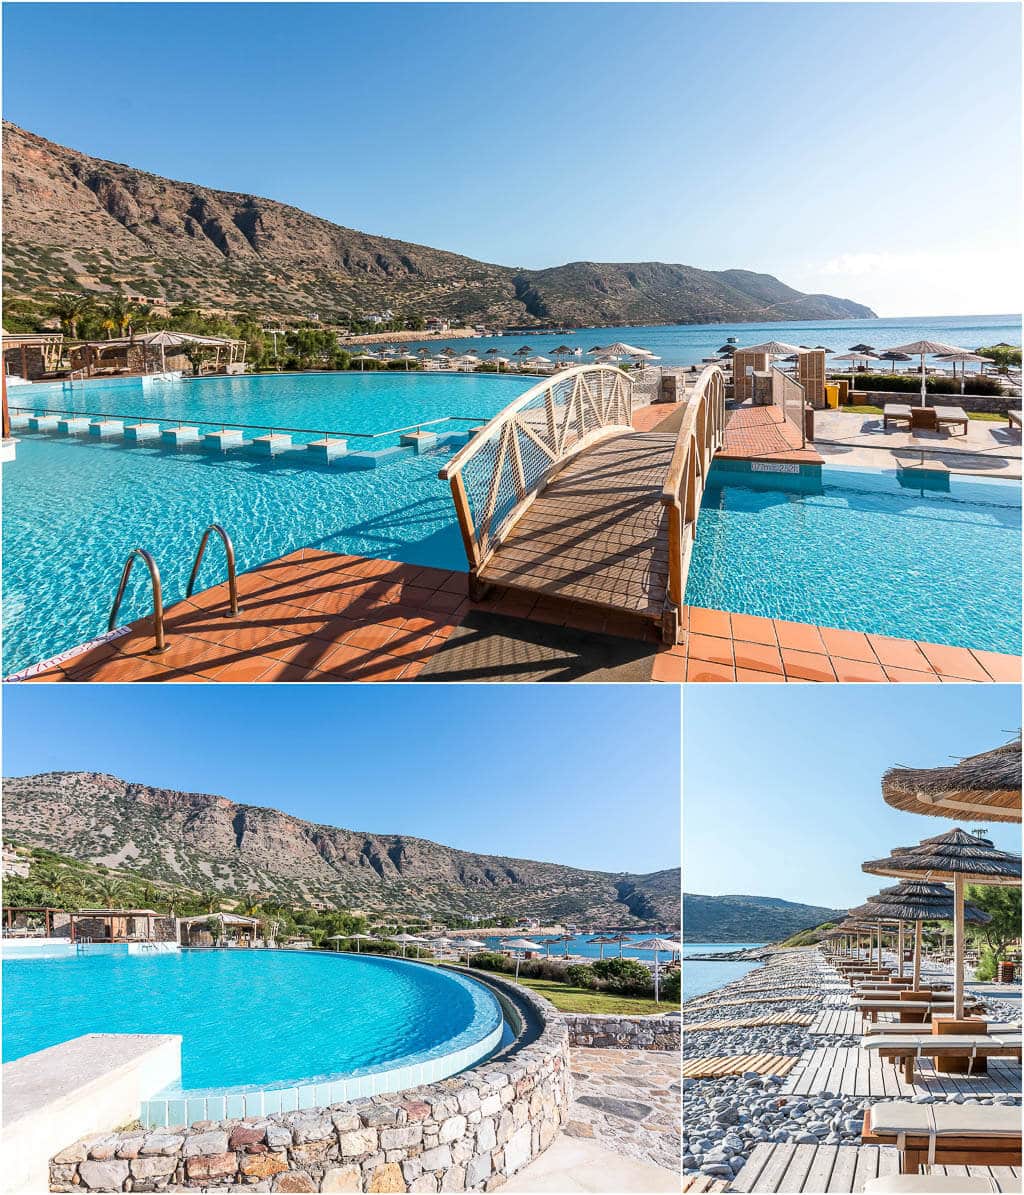 Hotel review - Staying at Blue Palace Resort & Spa , Crete , Greece. Luxury resort for honeymoon! Click through to read more @ hedonistit.com